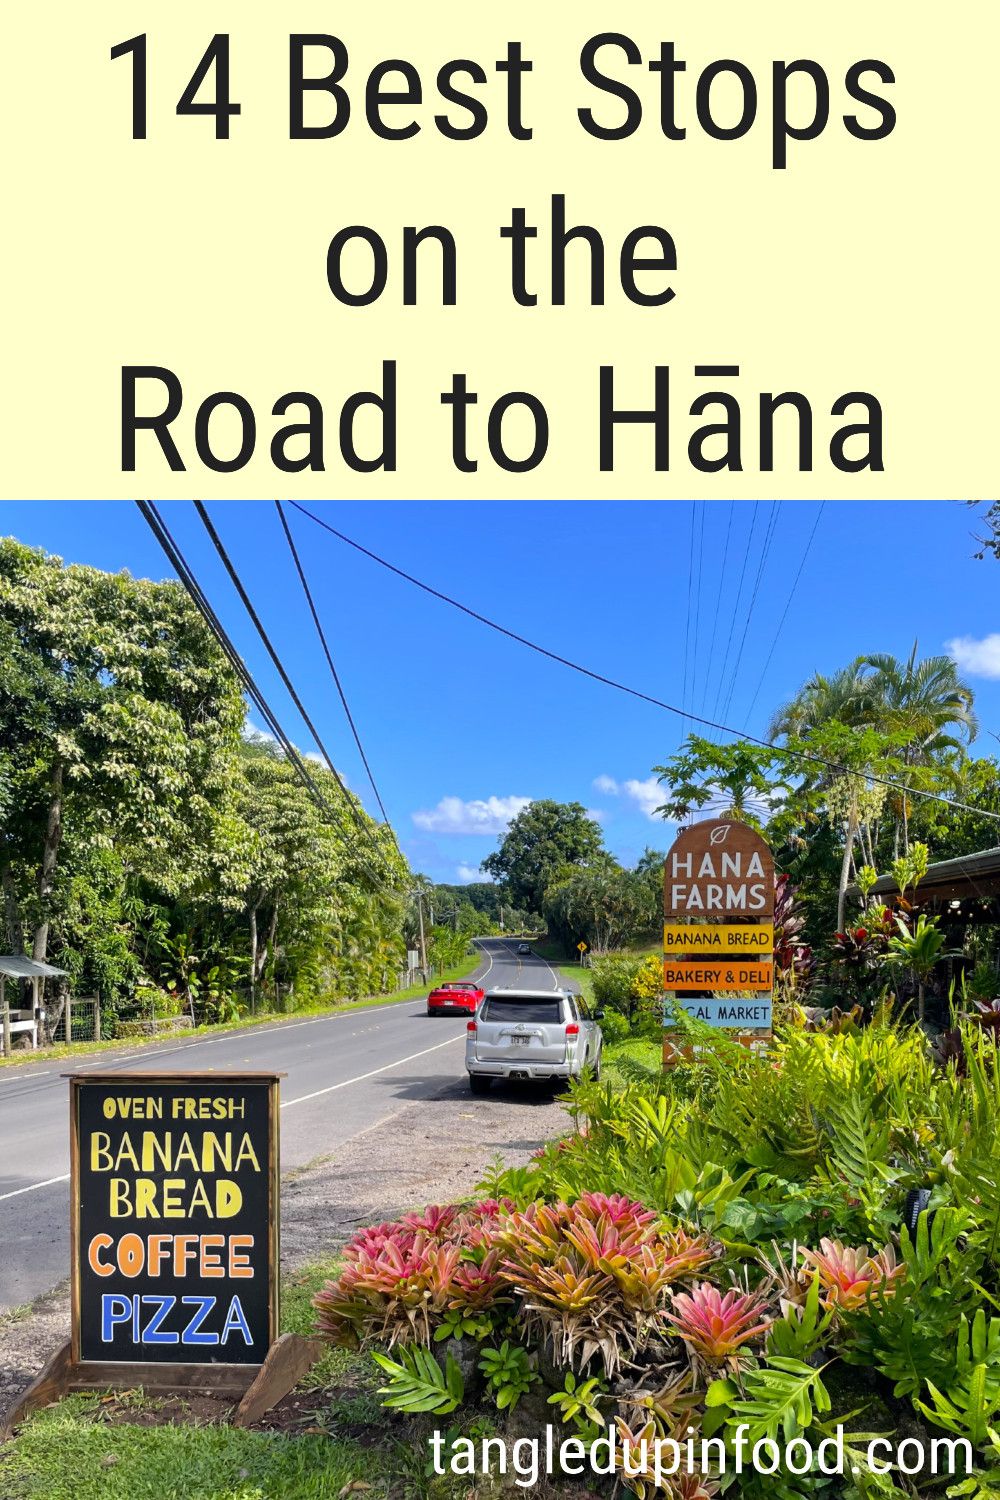 Photo of a roadside Hana Farms stand with text reading "14 Best Stops on the Road to Hana"